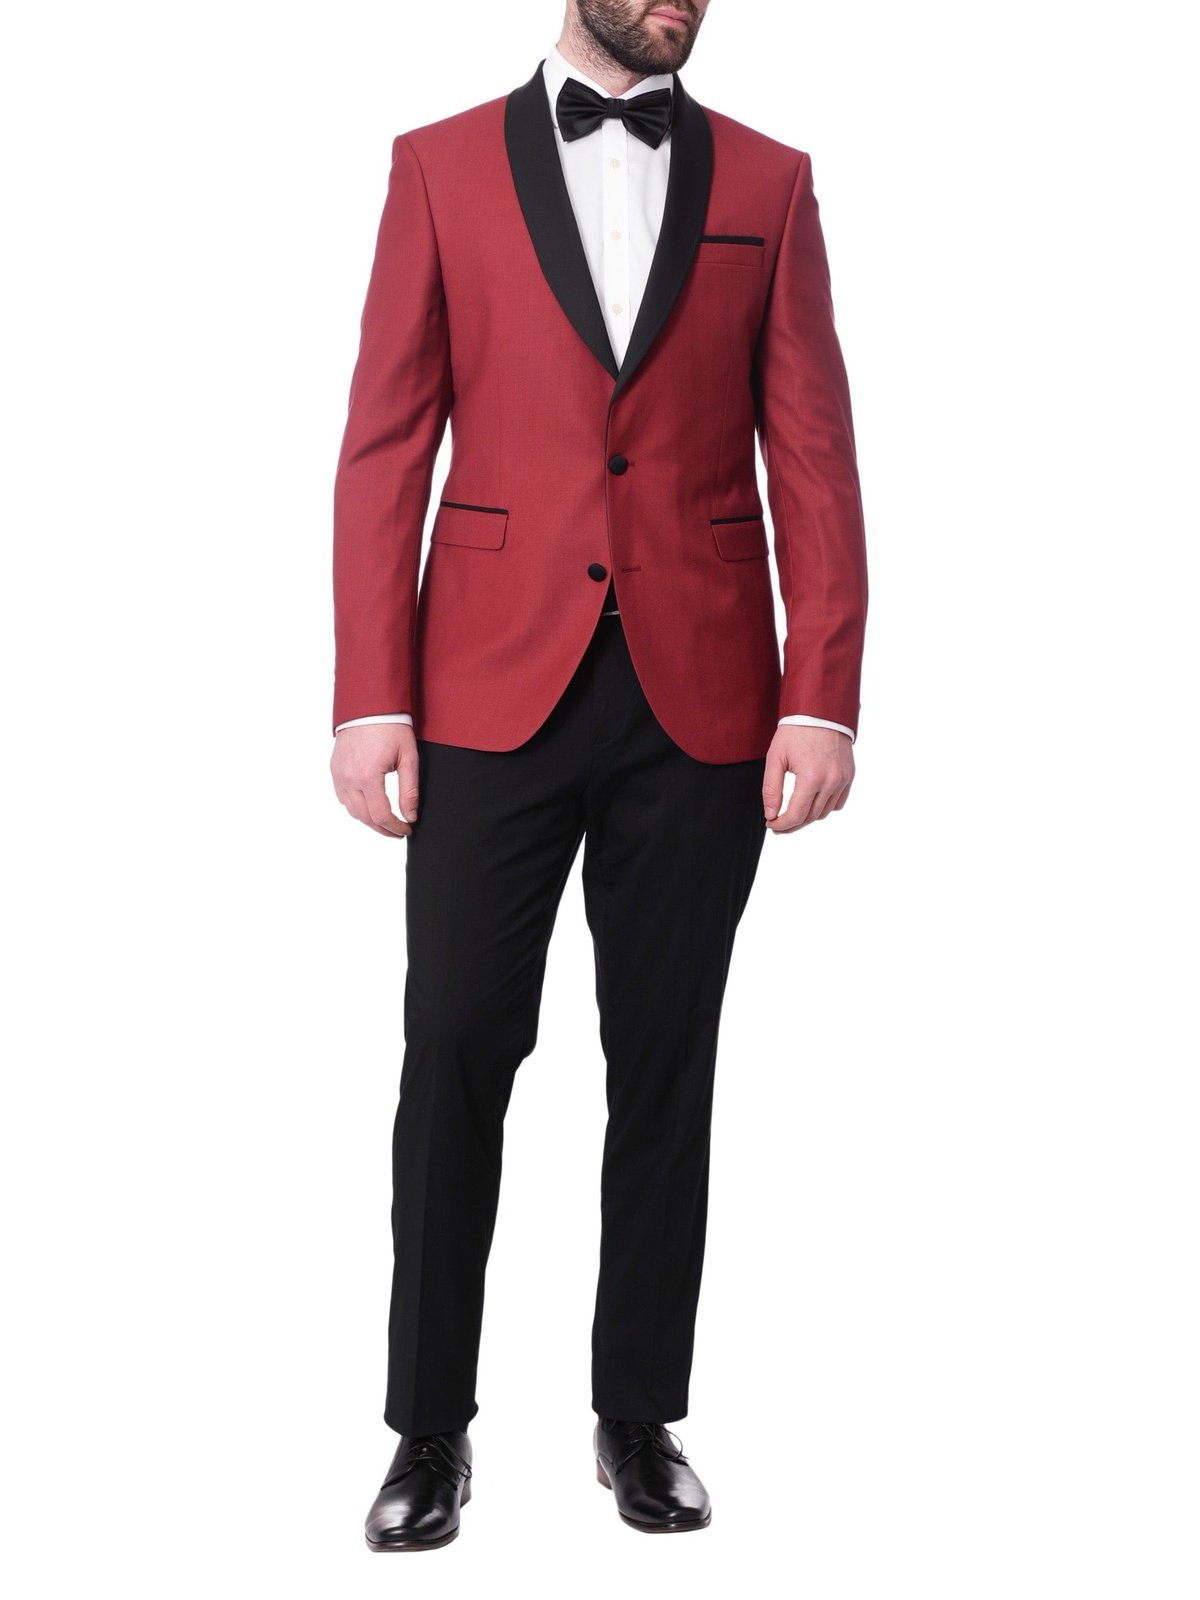 Cengizhan Baybars TWO PIECE SUITS Cengizhan Baybars Men's Solid Red Slim Fit Tuxedo Suit With Black Shawl Lapels